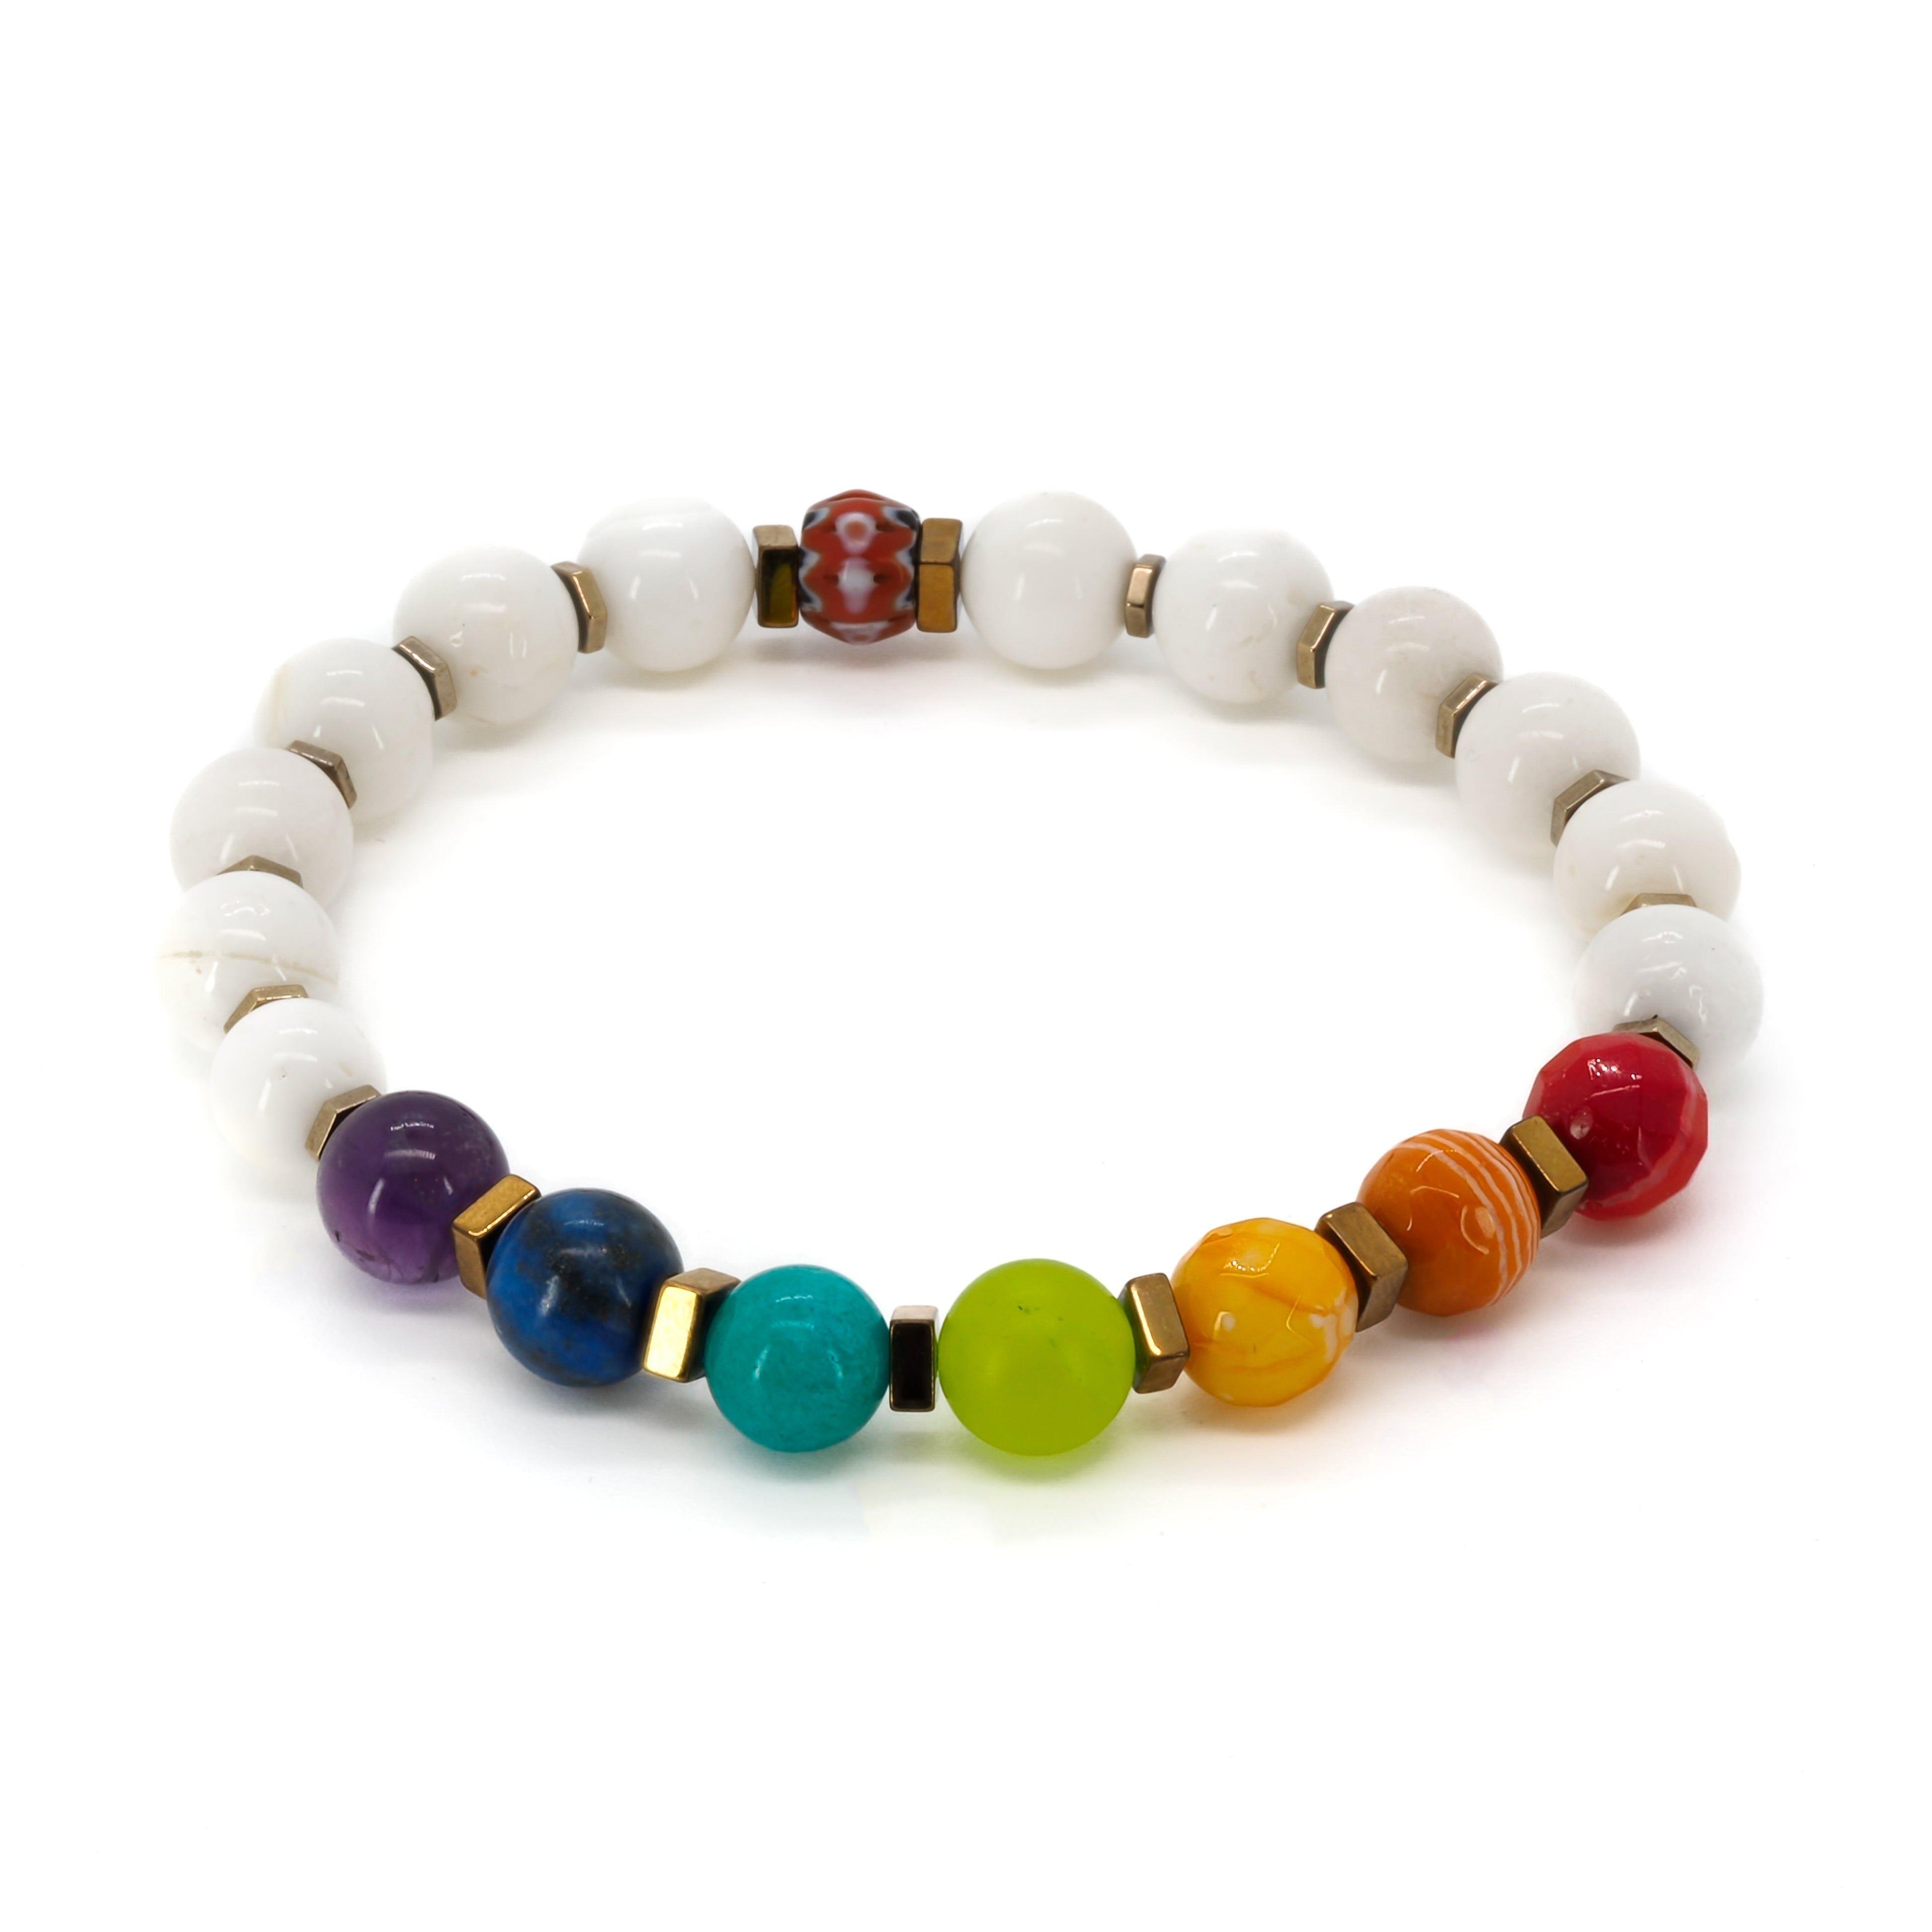 Chakra Bracelet with healing crystals for balance and alignment.